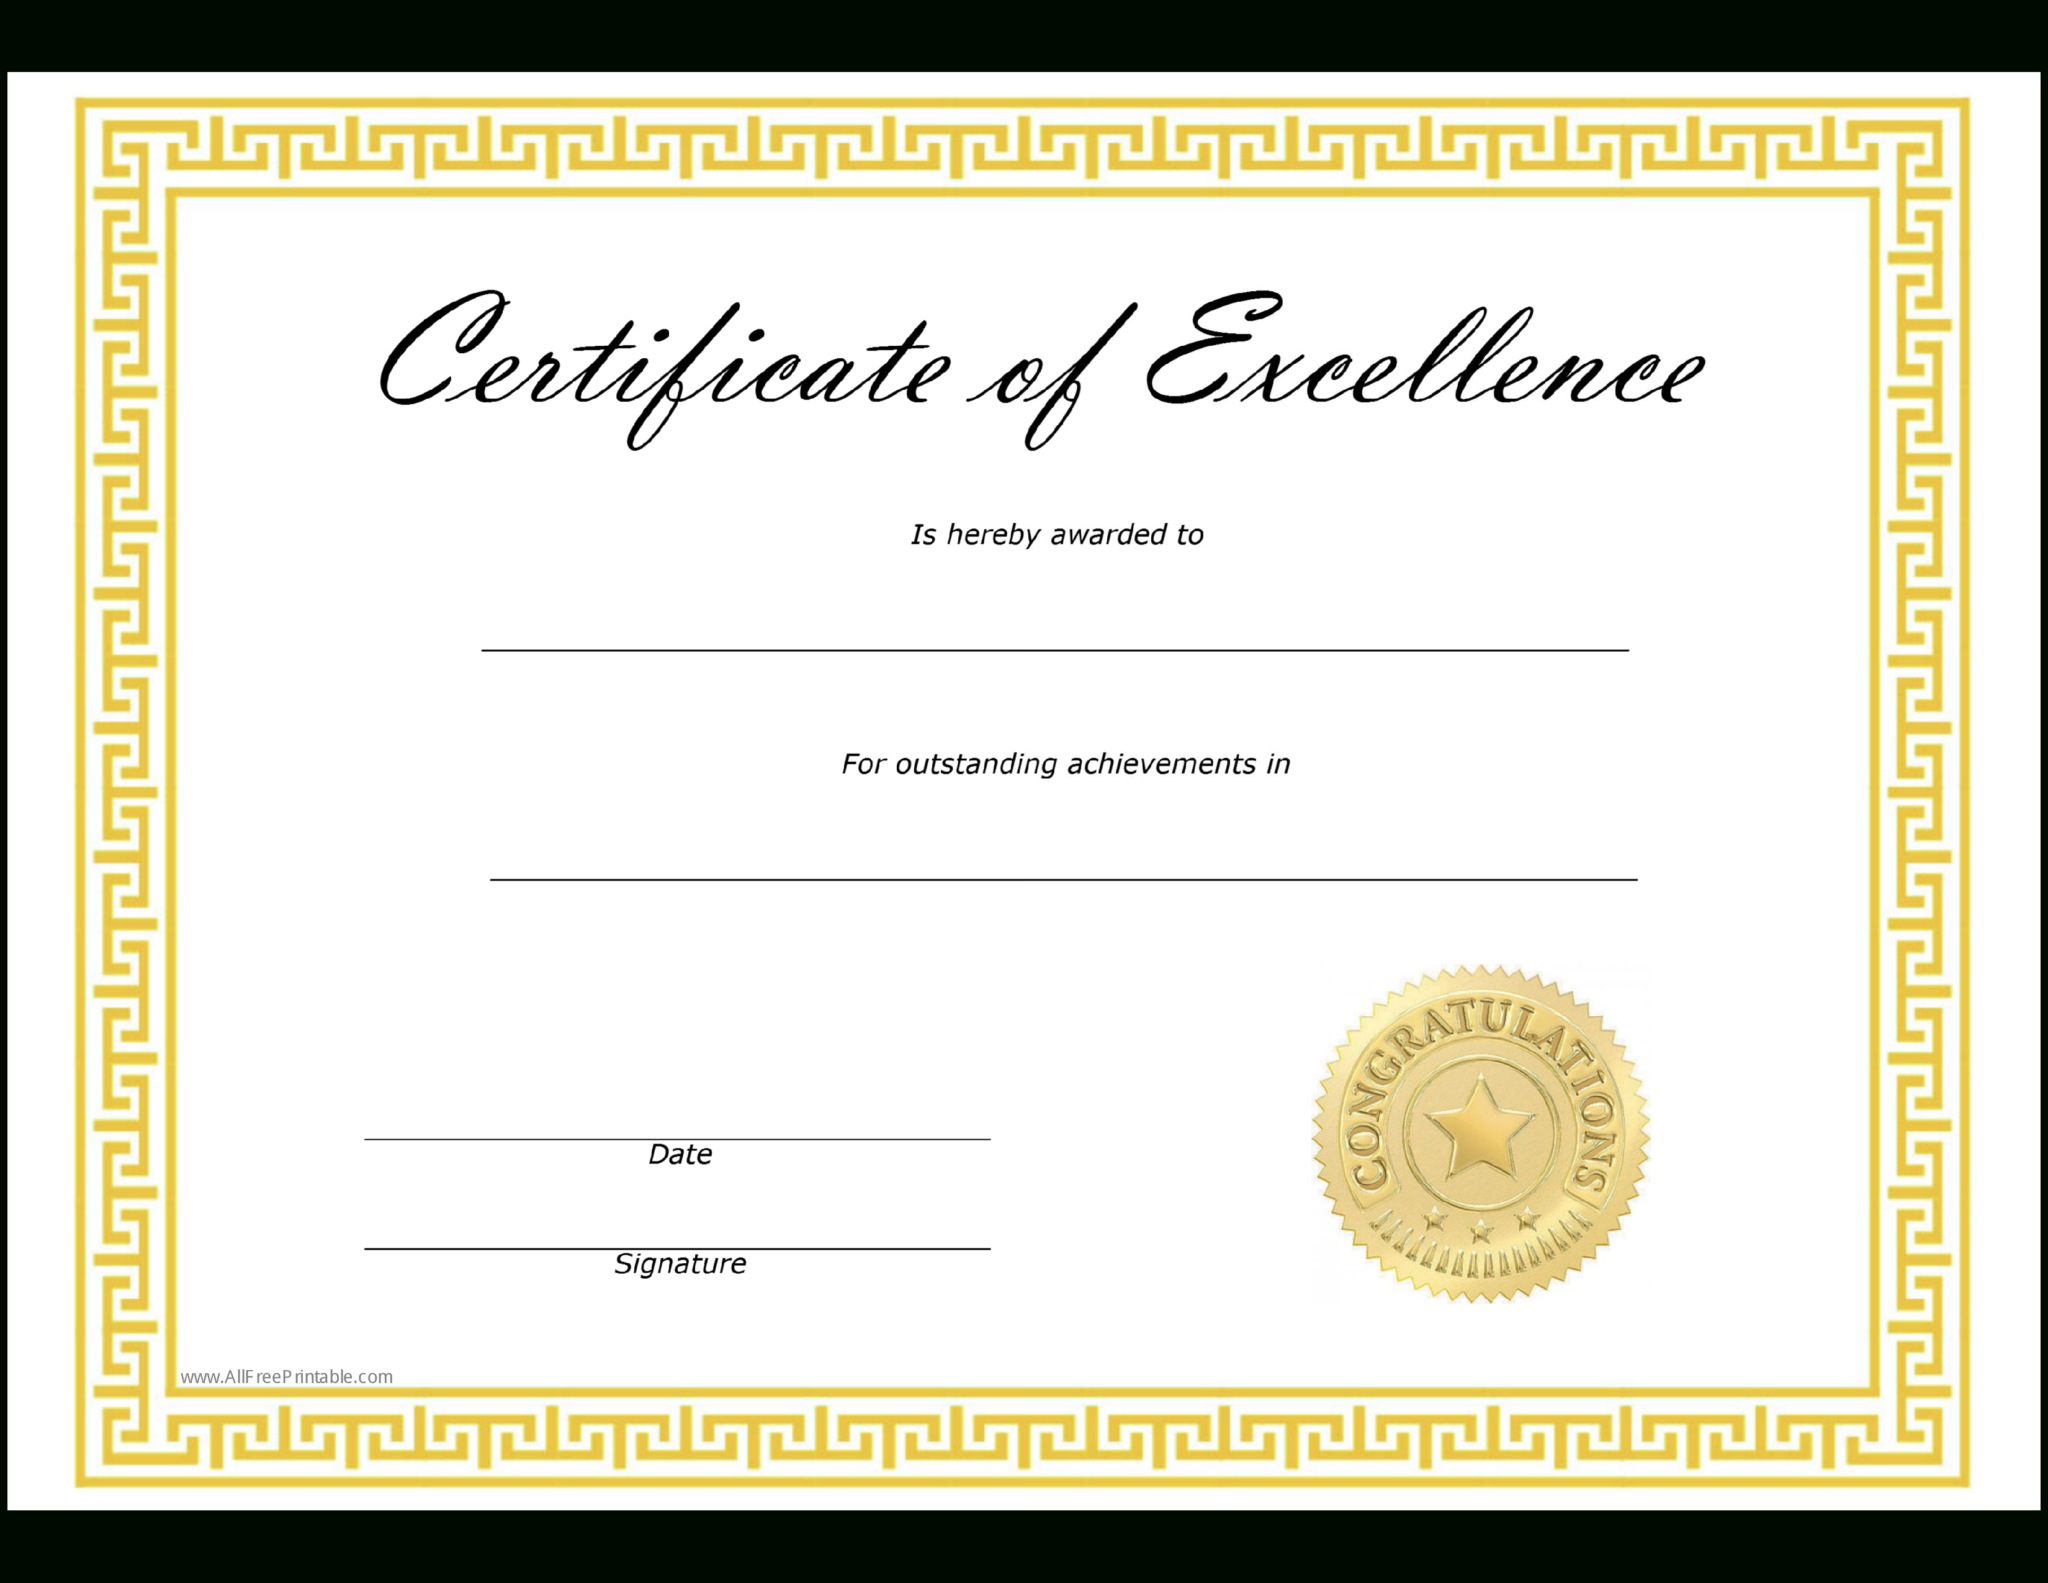 certificates-of-excellence-templates-calep-midnightpig-co-for-blank